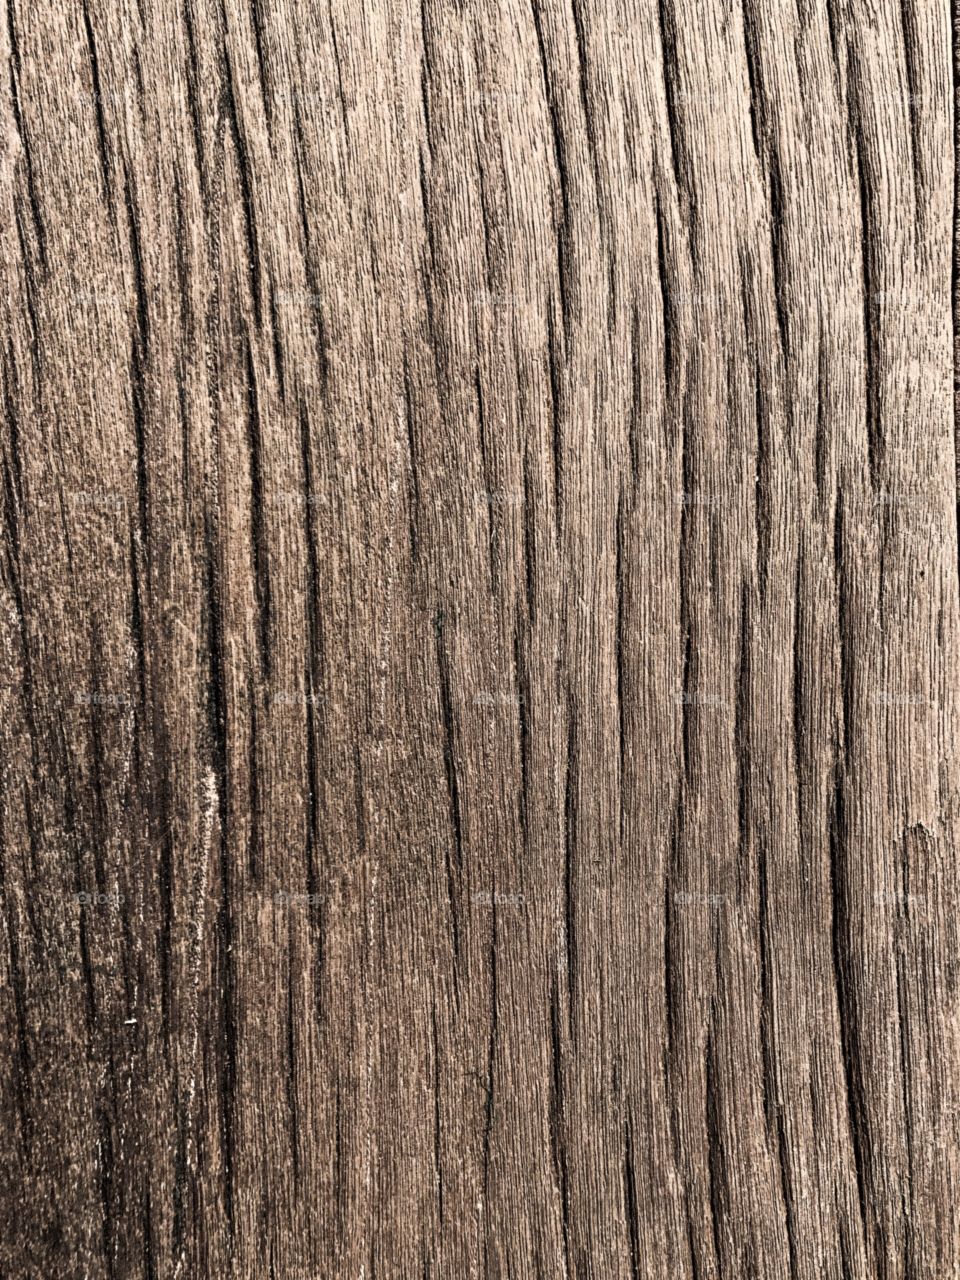 Natural wooden background